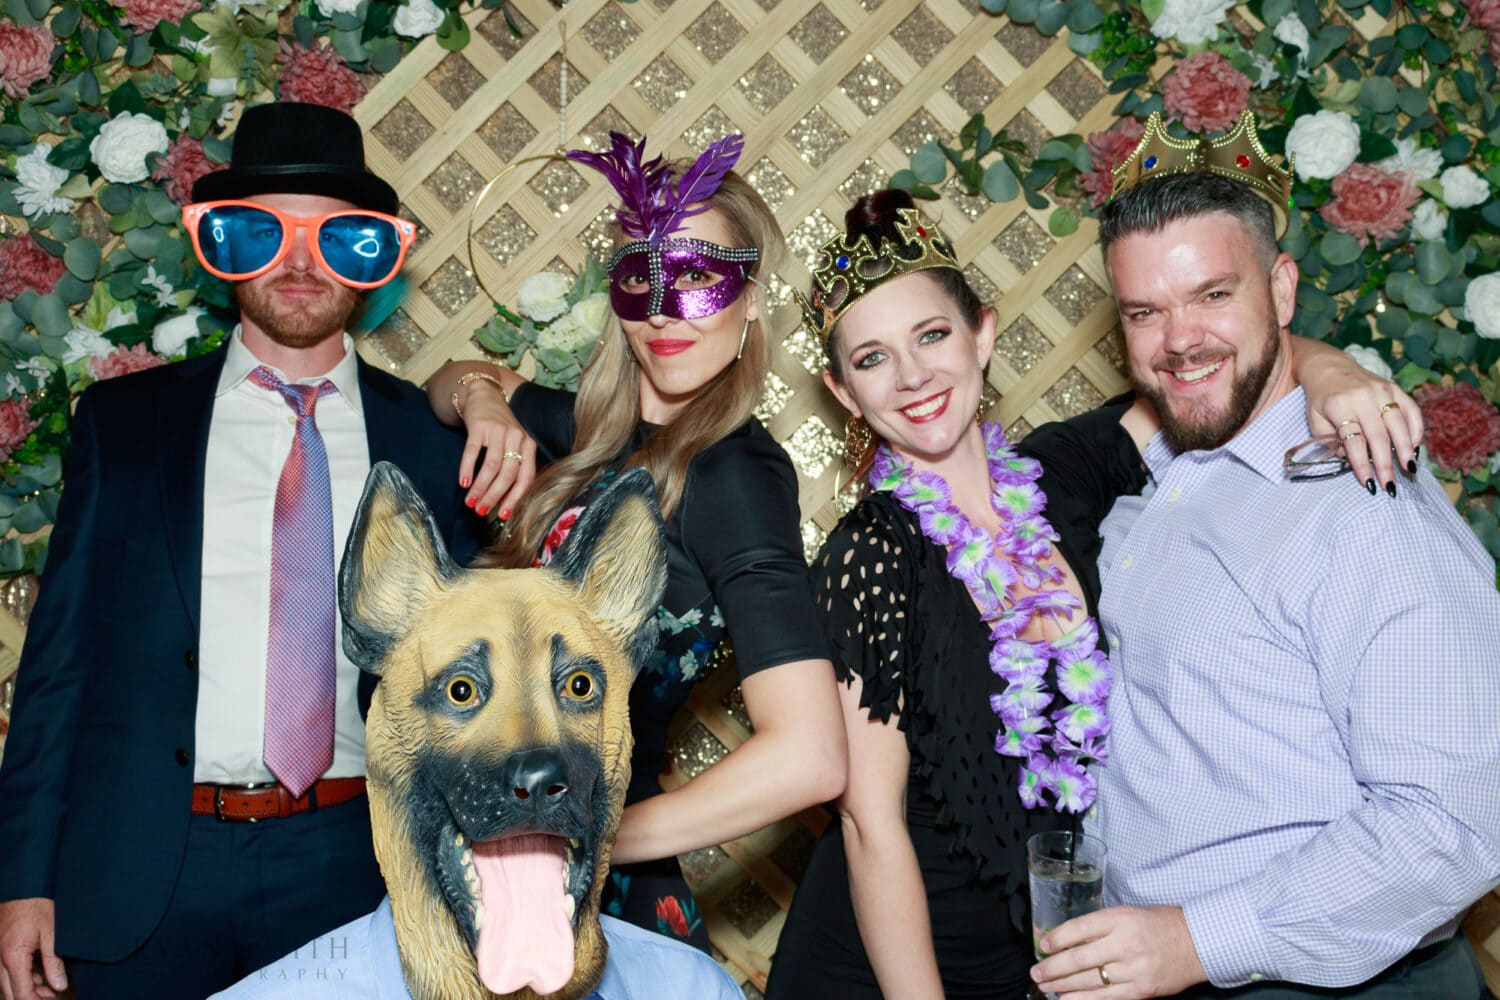 Fun photo booth pictures with a custom wooden lattice background - Pawleys Plantation Golf & Country Club